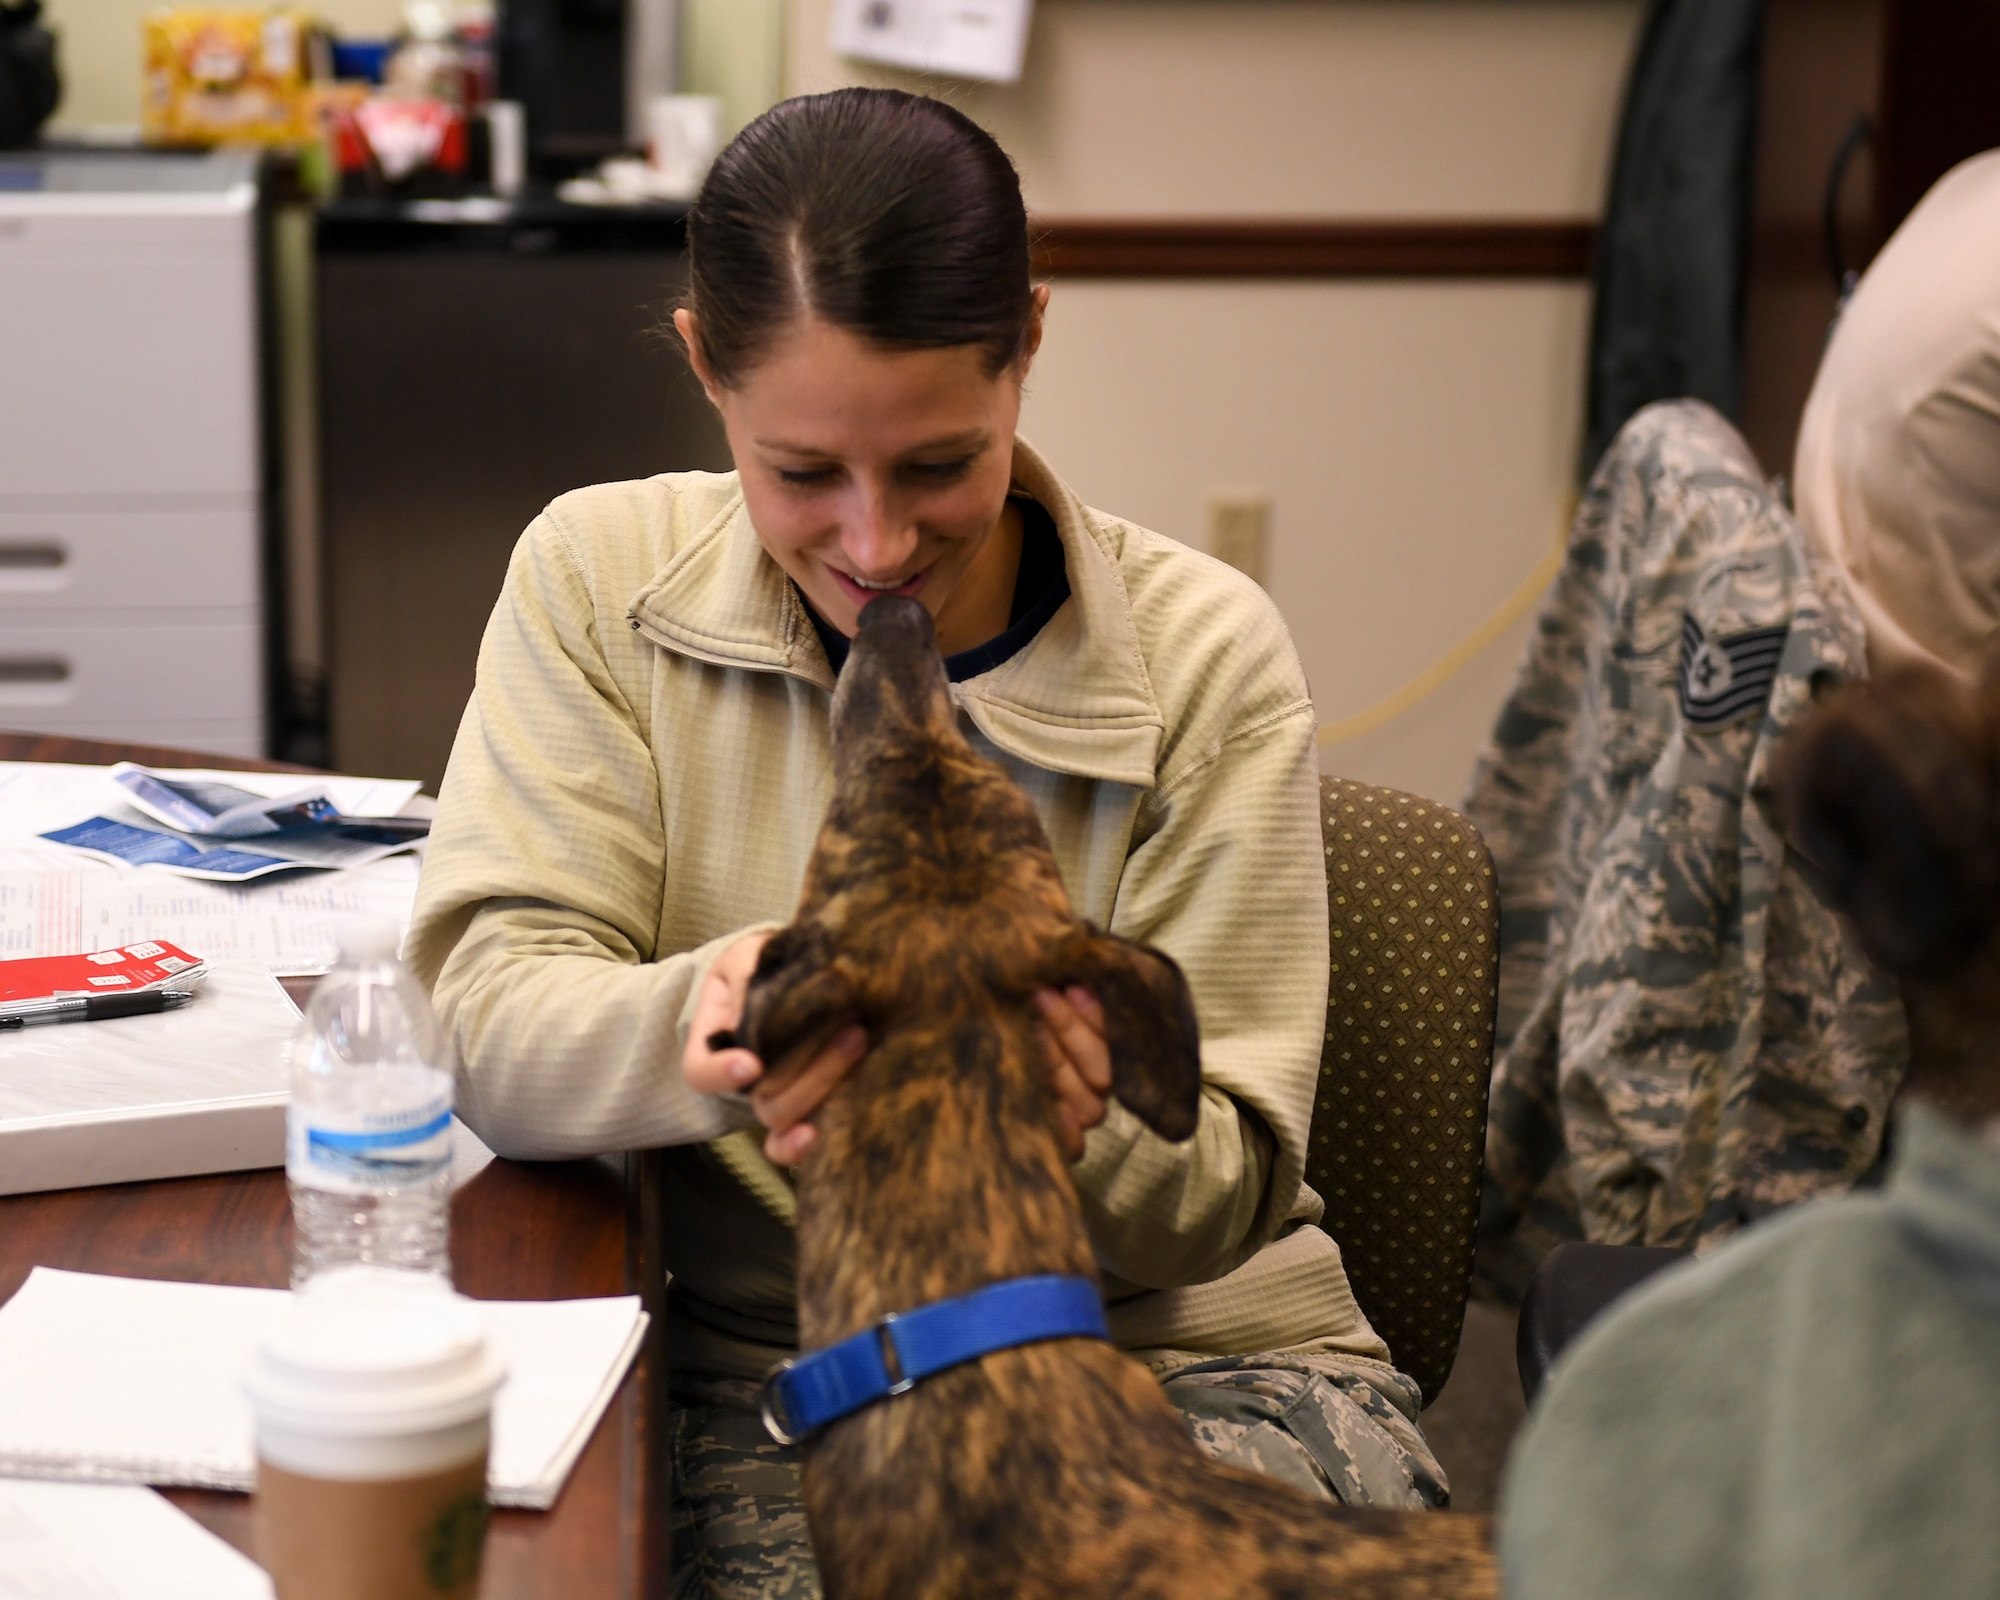 Boris, therapy dog with the 911th Airlft Wing, greets Tech. Sgt. Allissa Landgraff, broadcaster with the 911th AW, at the Pittsburgh International Airport Air Reserve Station, Pennsylvania, October 13, 2018. Boris’ primary role at the 911th AW is to improve morale and lift the spirits of anyone in need, which is accomplished through animal-assisted activities.